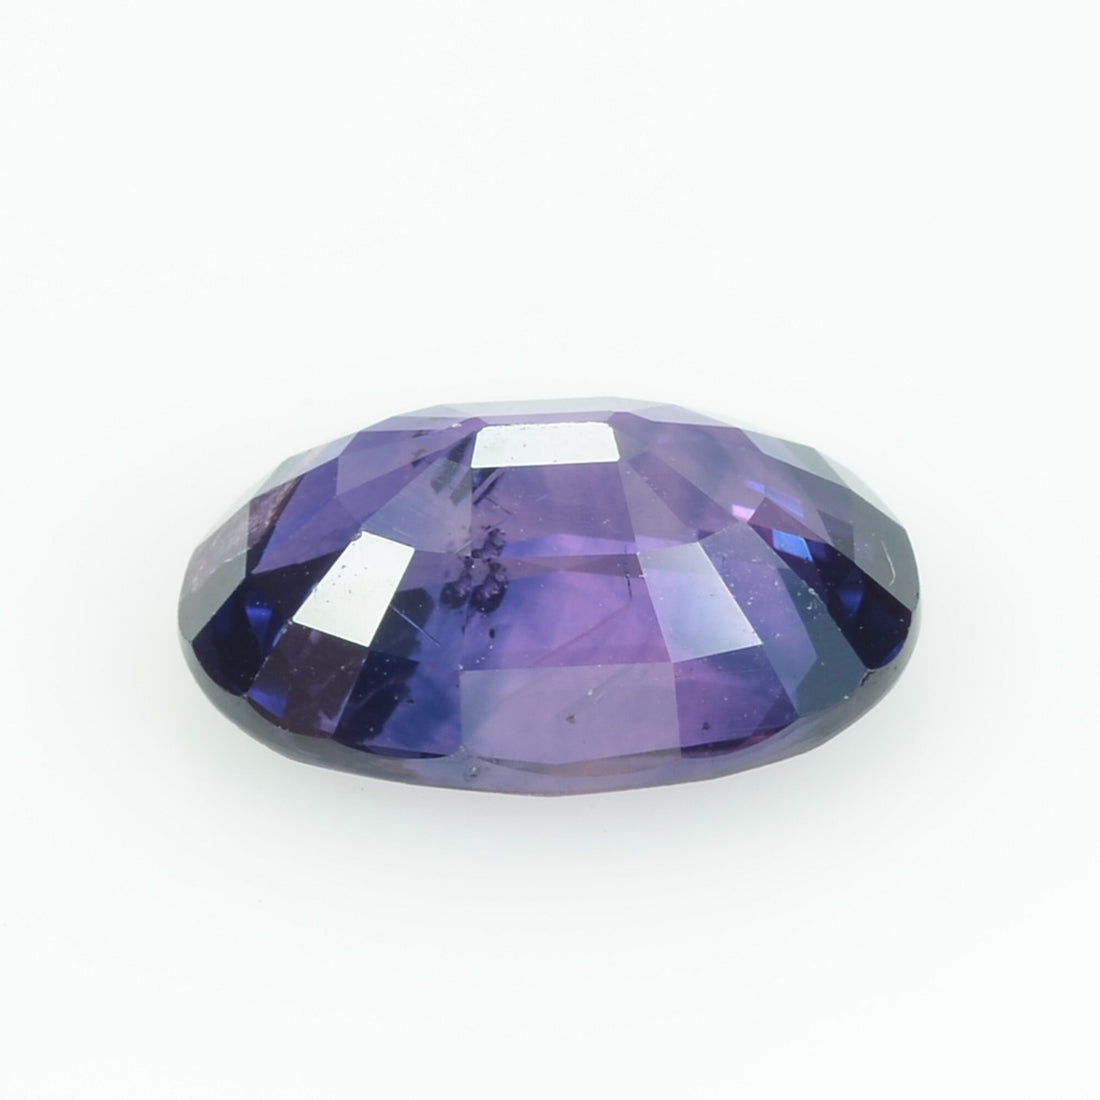 2.85 Cts Natural Purple Sapphire Loose Gemstone Oval Cut